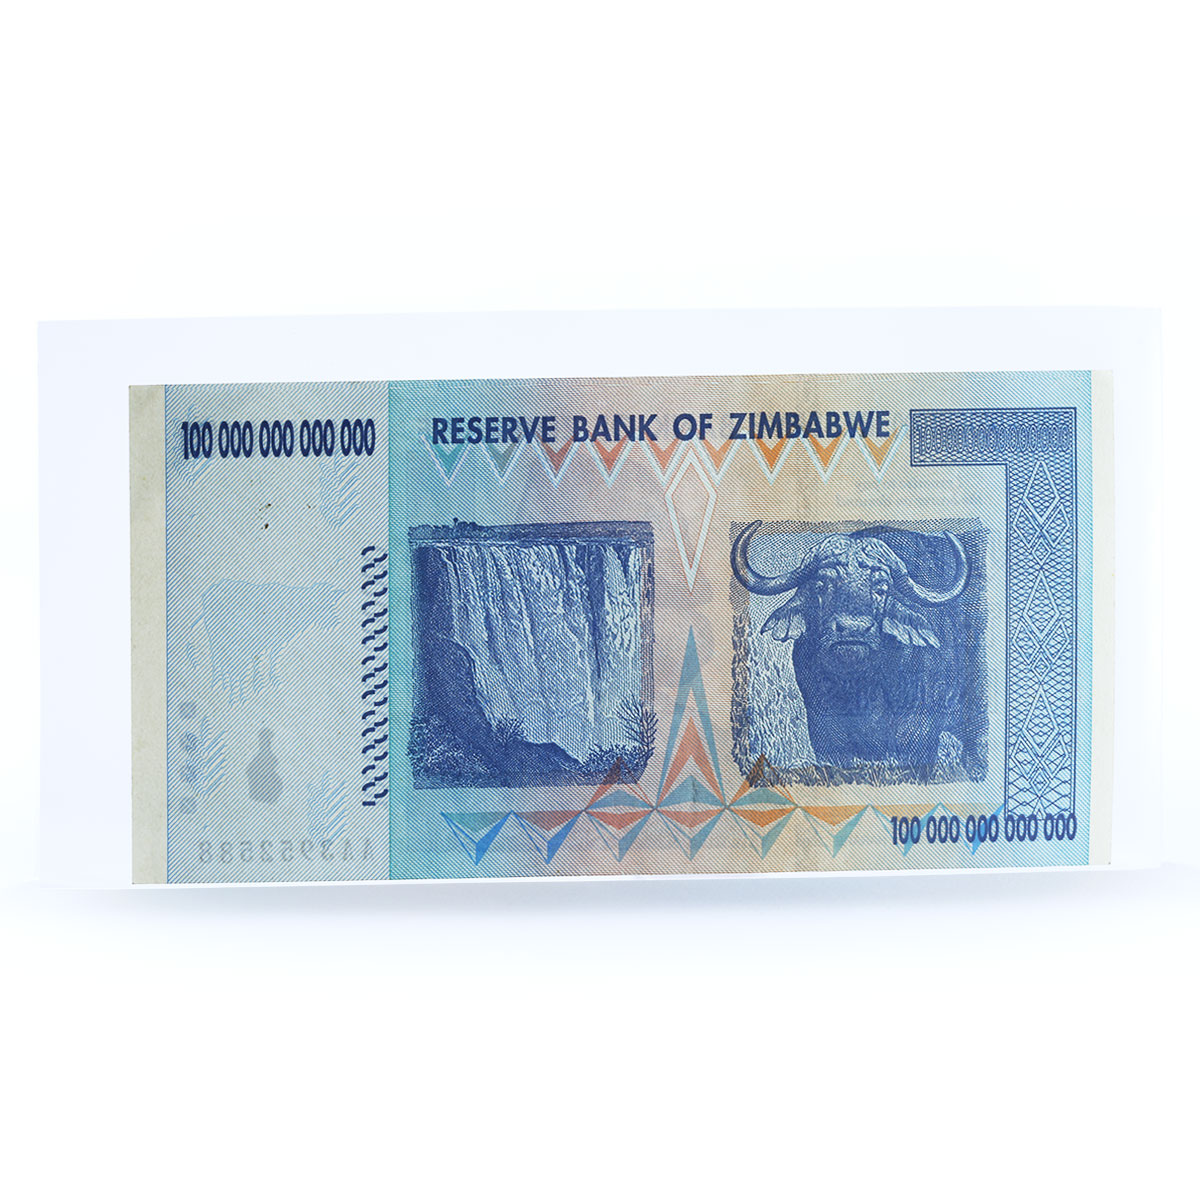 ZIMBABWE 100 TRILLION DOLLARS BANKNOTE CURRENCY UNCIRCULATED 2008